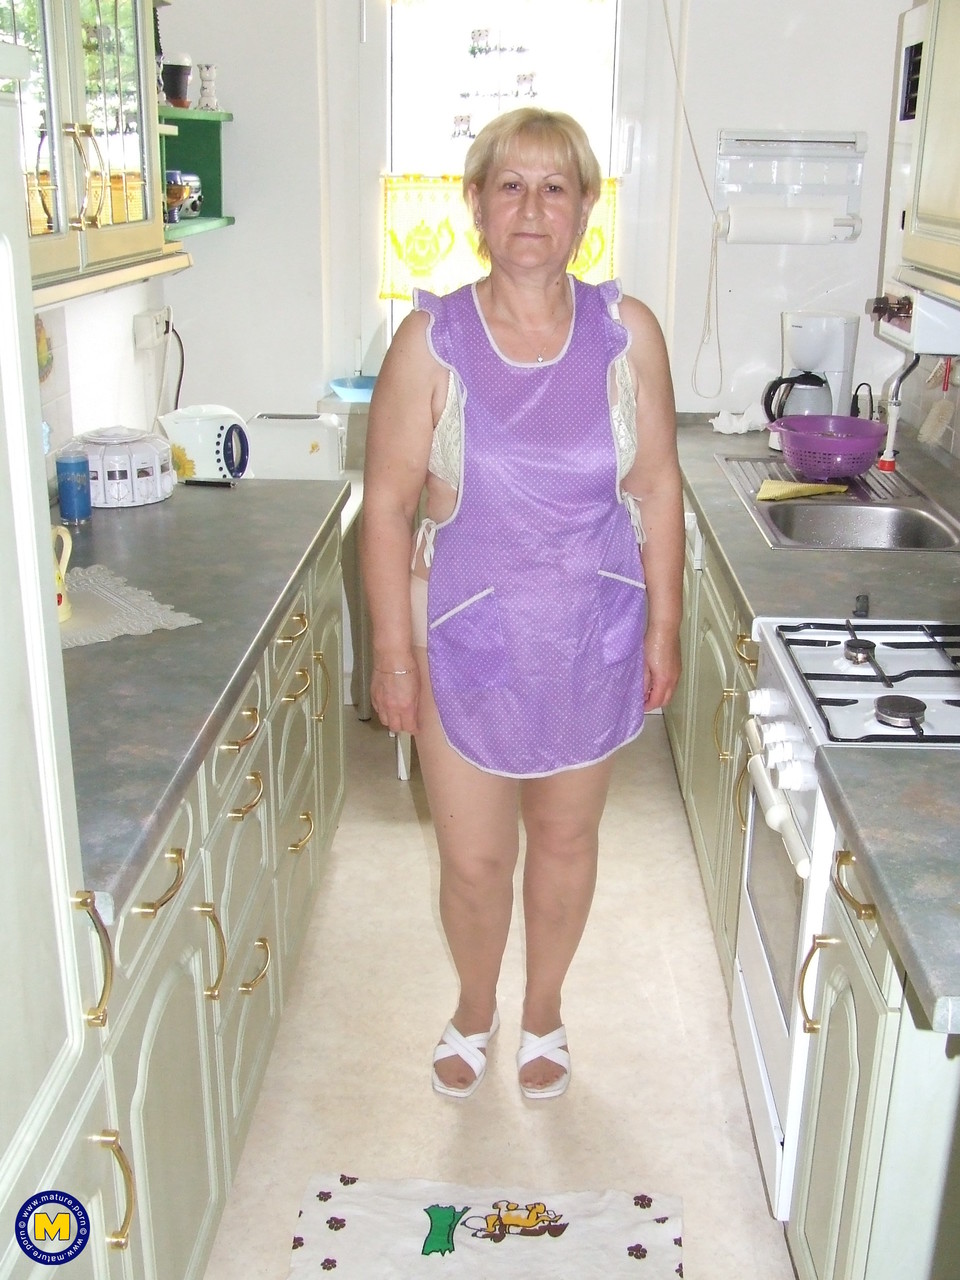 Short haired German cleaning lady Dagmar shows her mature cunt in the kitchen porn photo #425226956 | Mature NL Pics, Dagmar, German, mobile porn